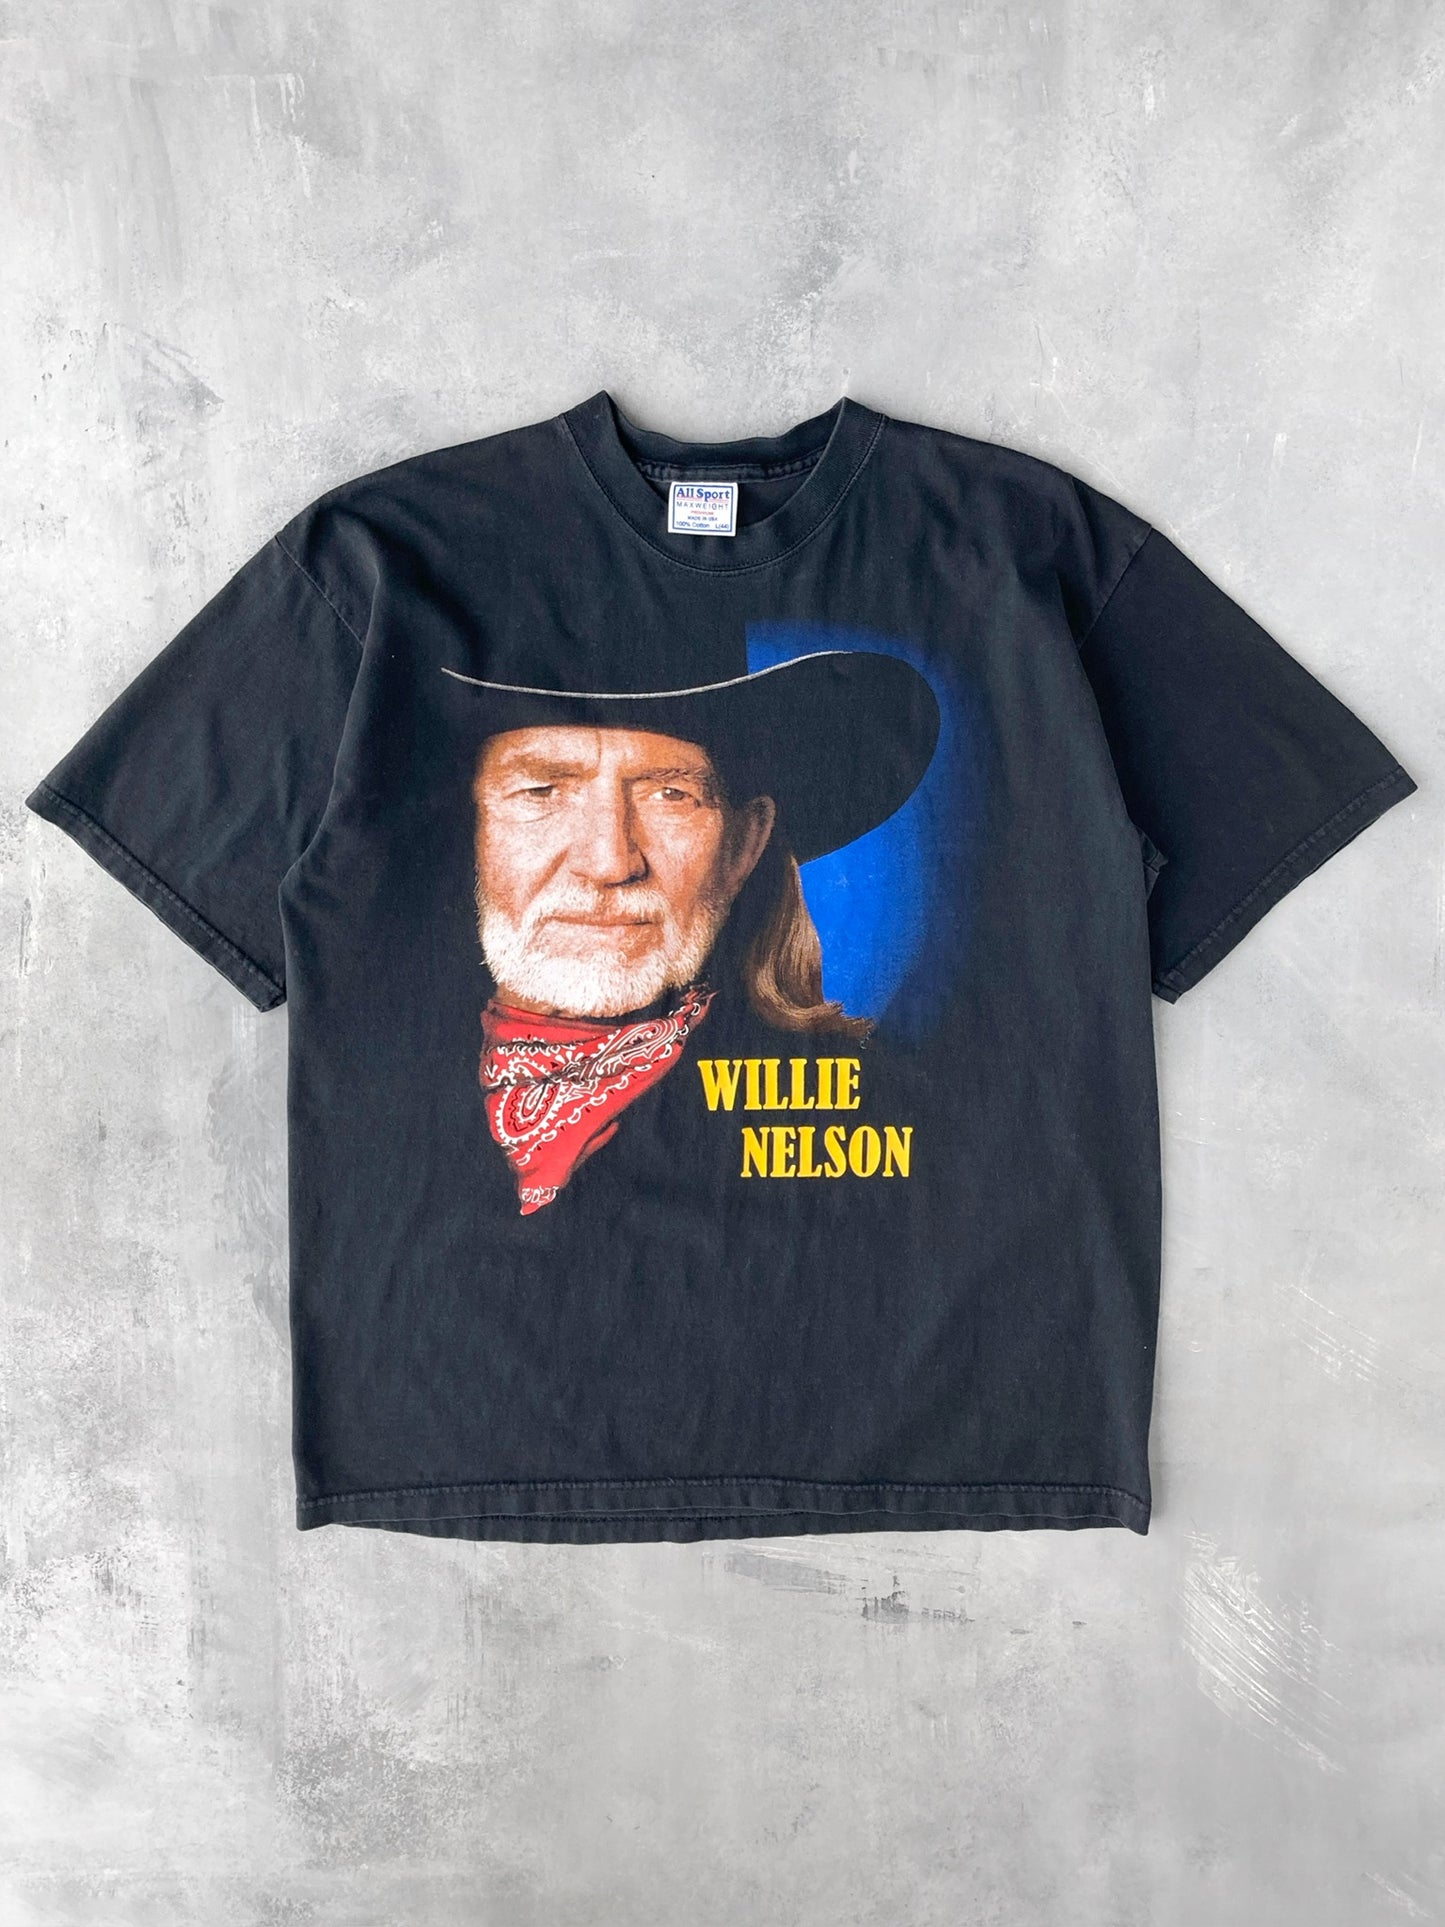 Willie Nelson T-Shirt 90's - Large